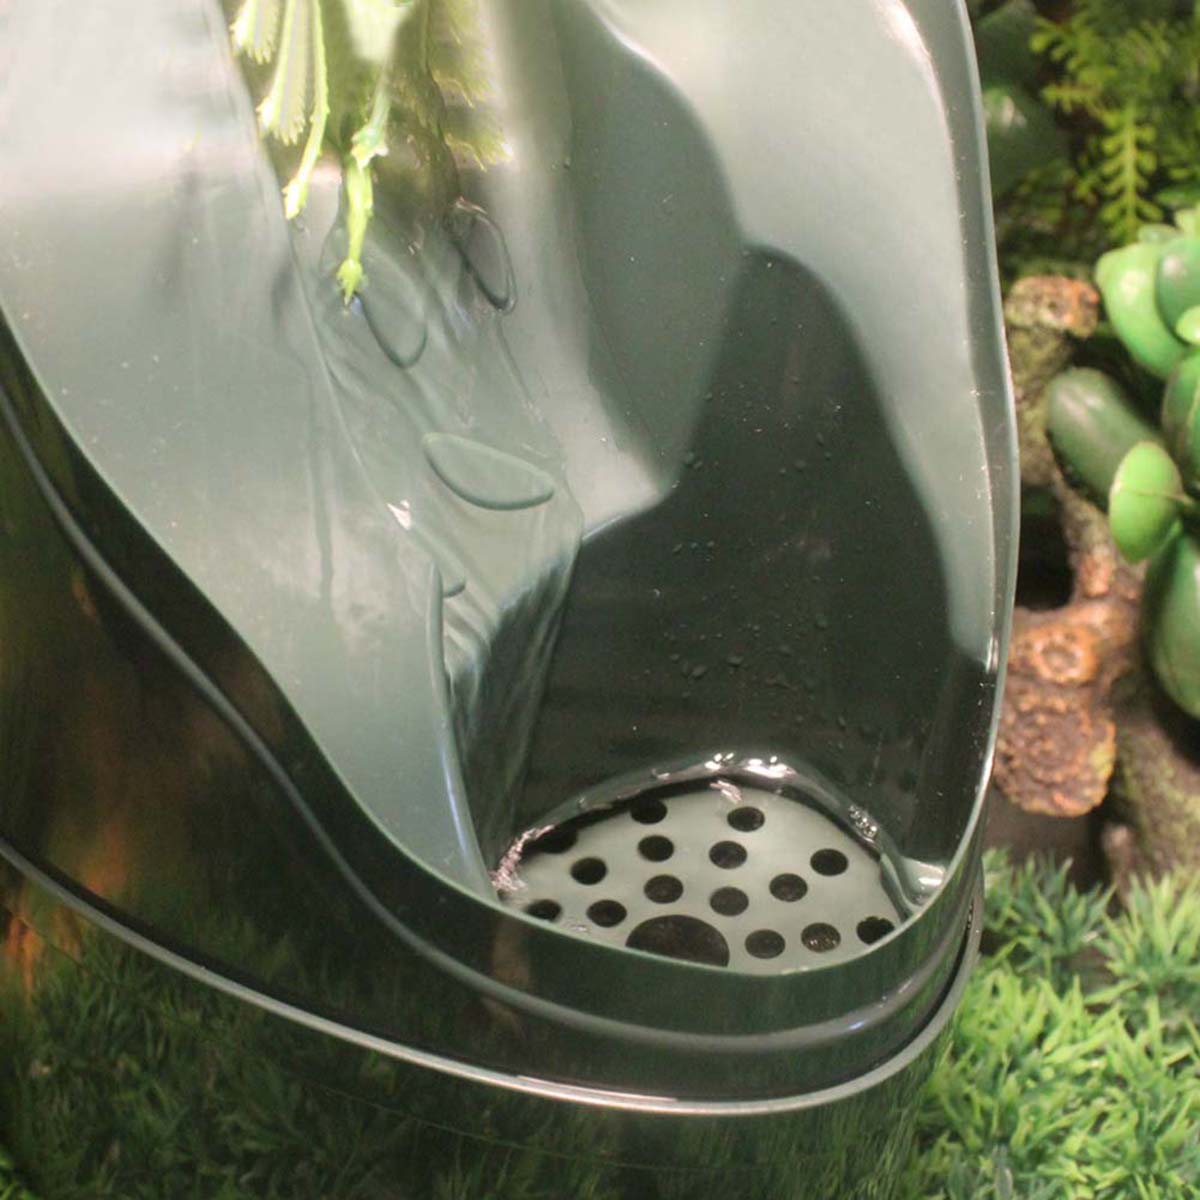 Automatic-Waterer-Reptile-Drinking-Water-Feeding-Drinkers-Tools-Fountain-Chameleon-Lizard-Dispenser--1453430